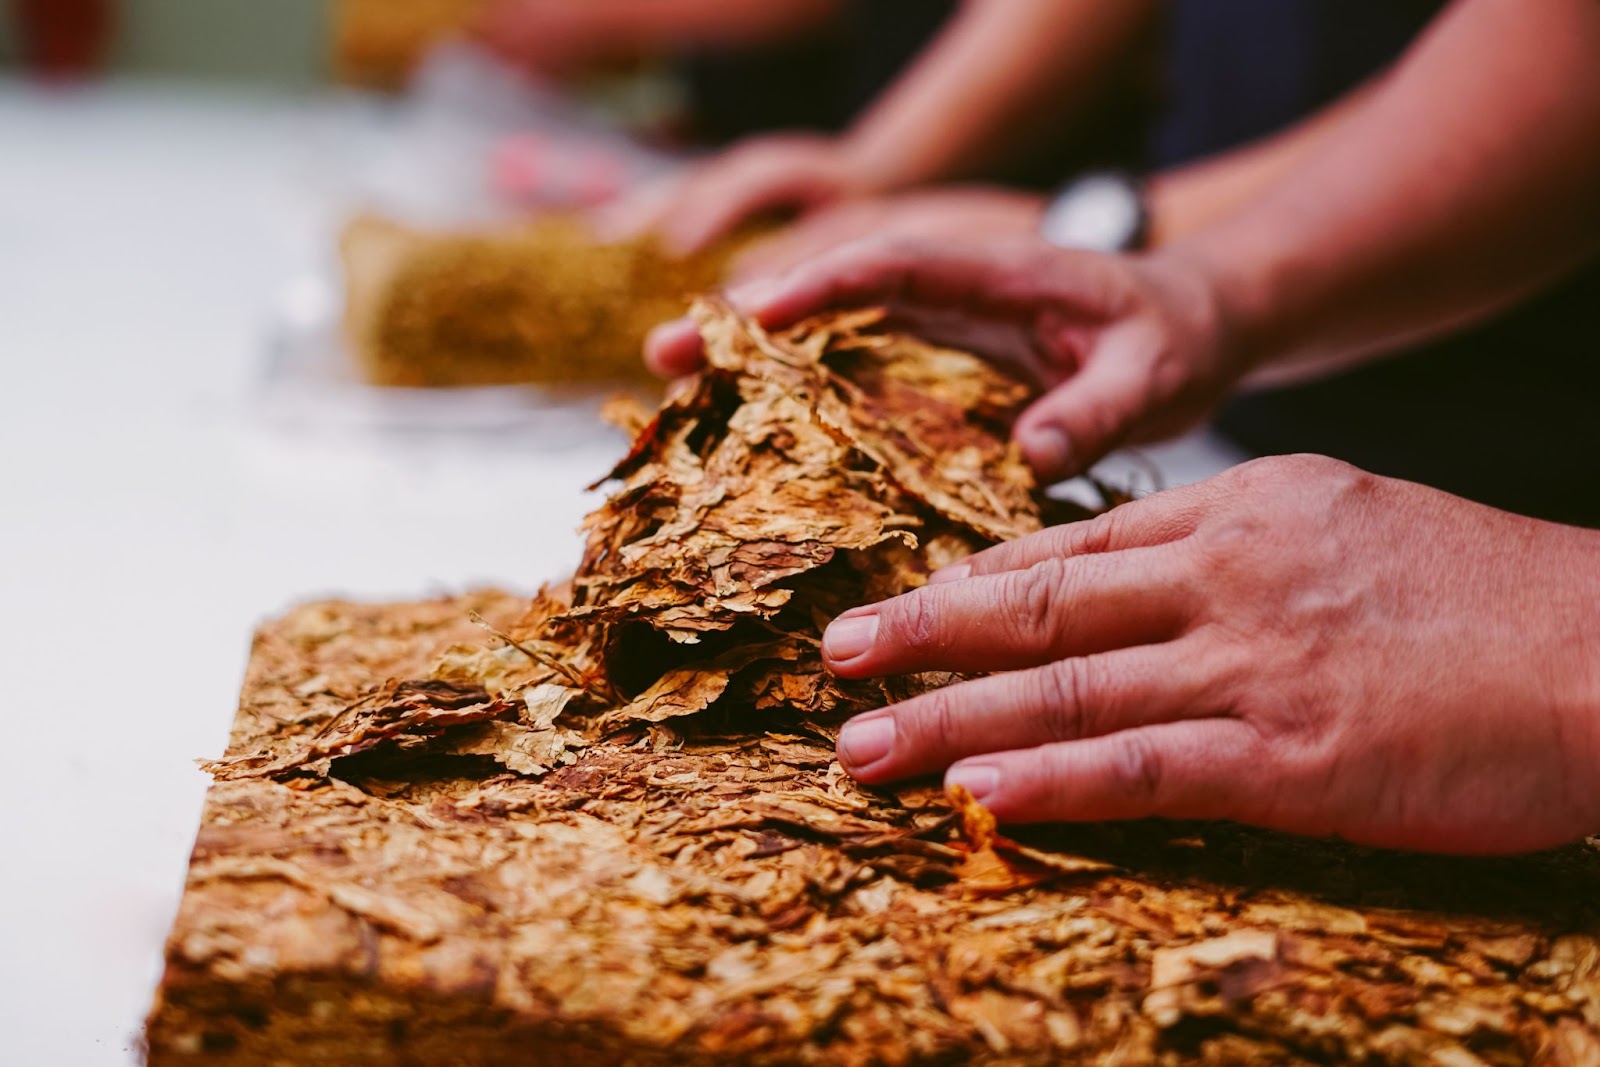 Hands working with dried tobacco leaves